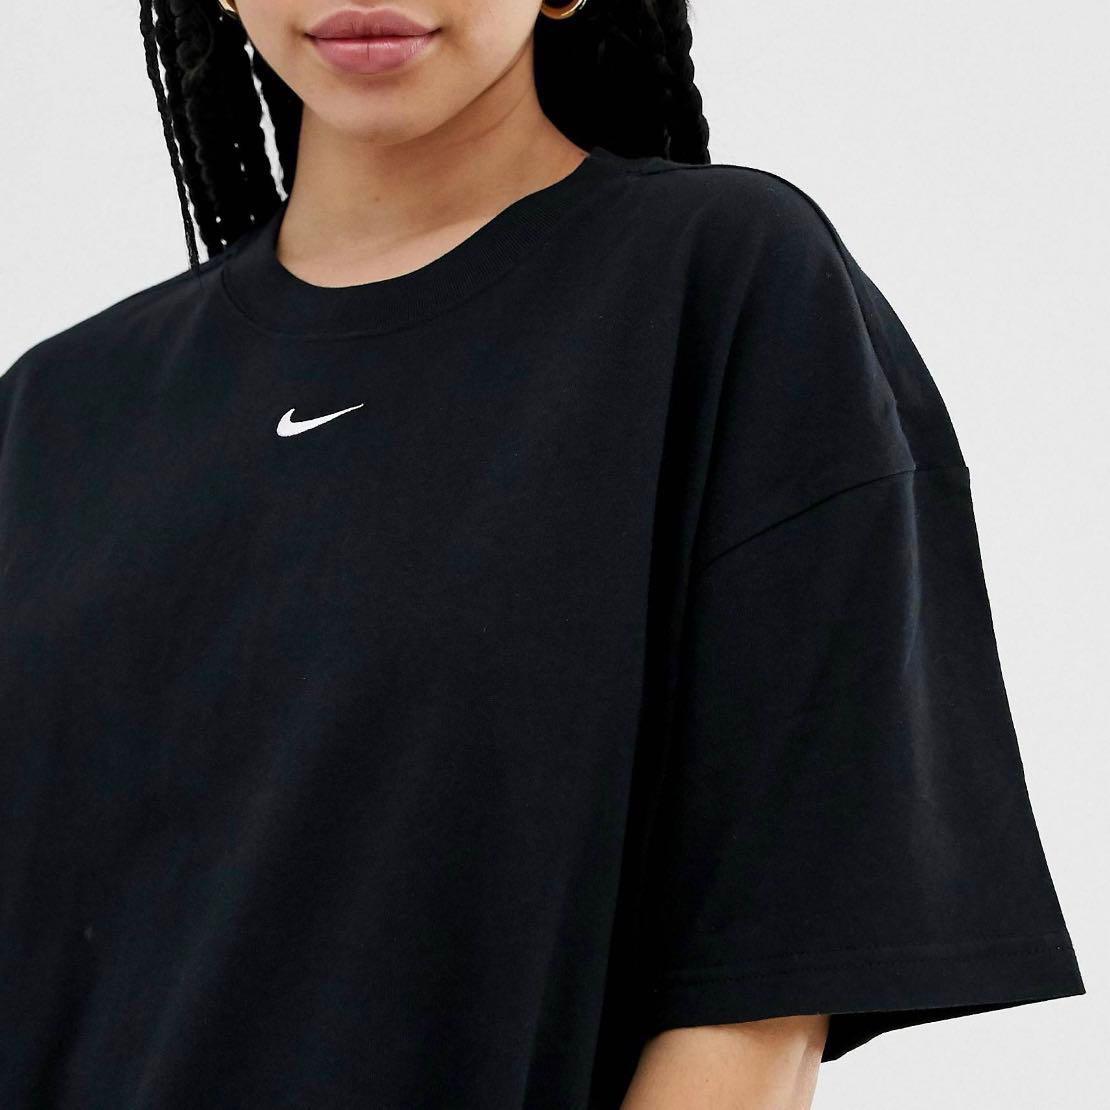 nike t shirt with logo in middle